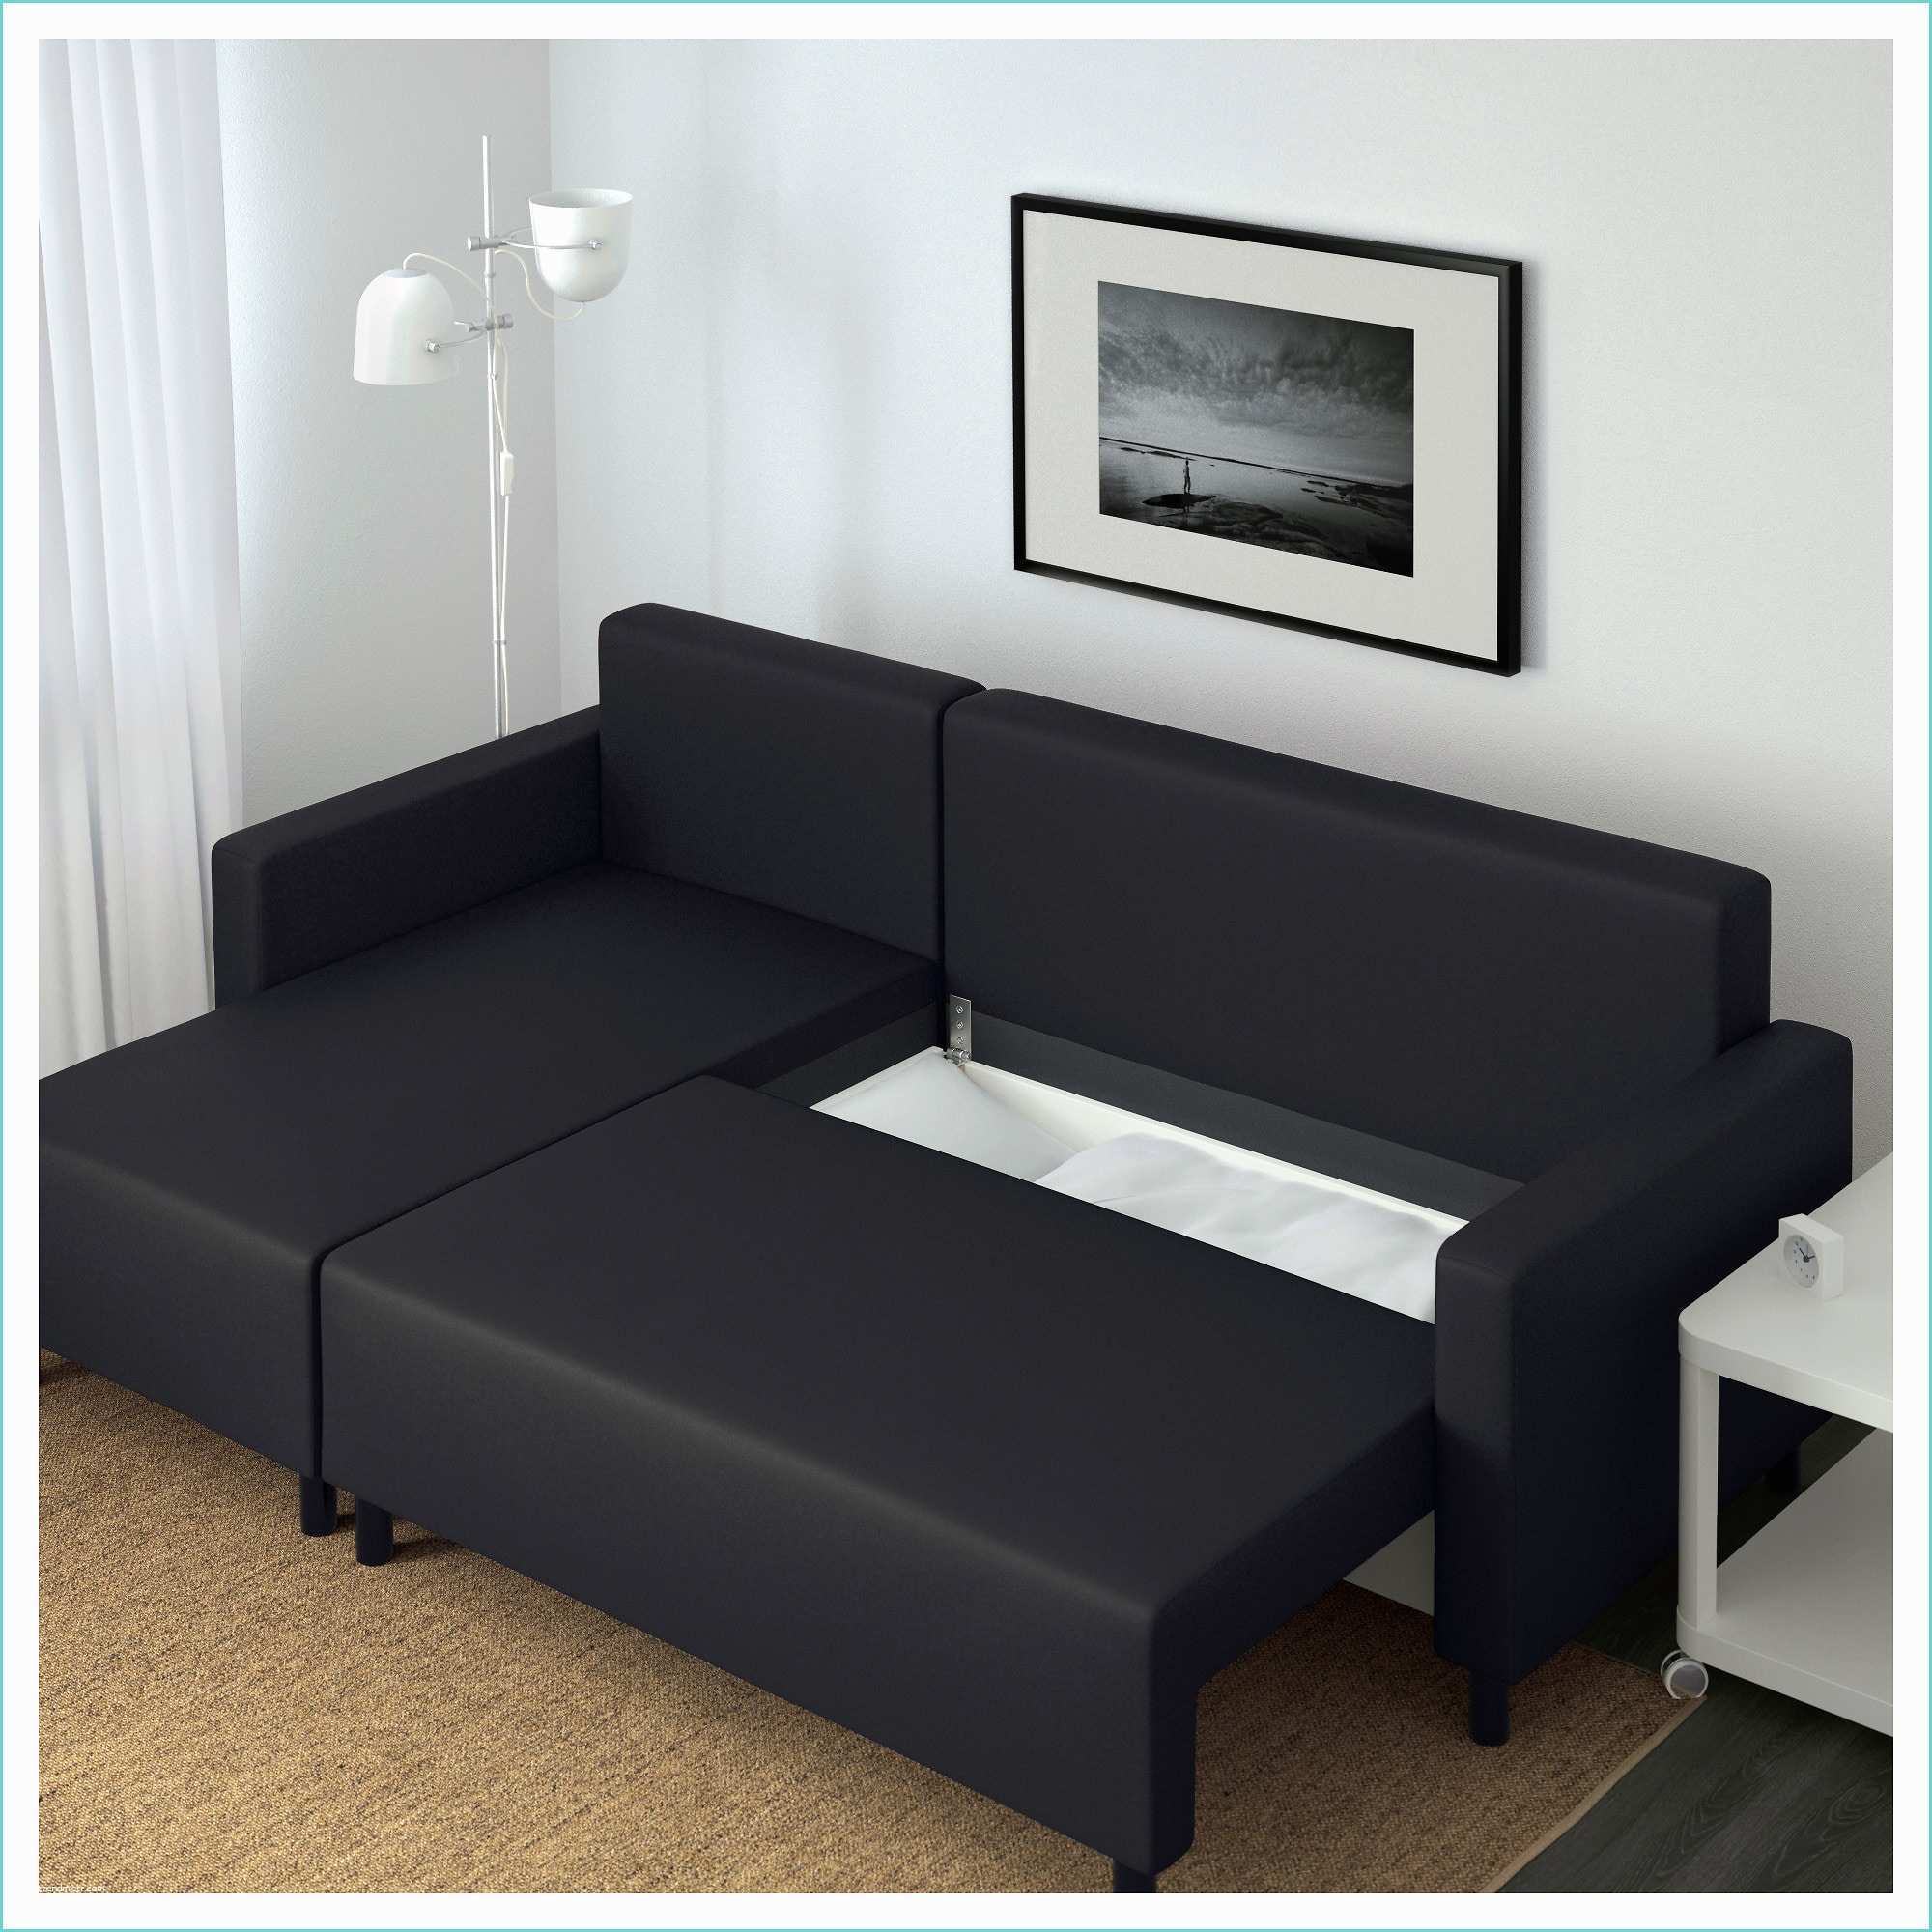 Sofa Beds In Ikea Lugnvik sofa Bed with Chaise Longue Granån Black Ikea